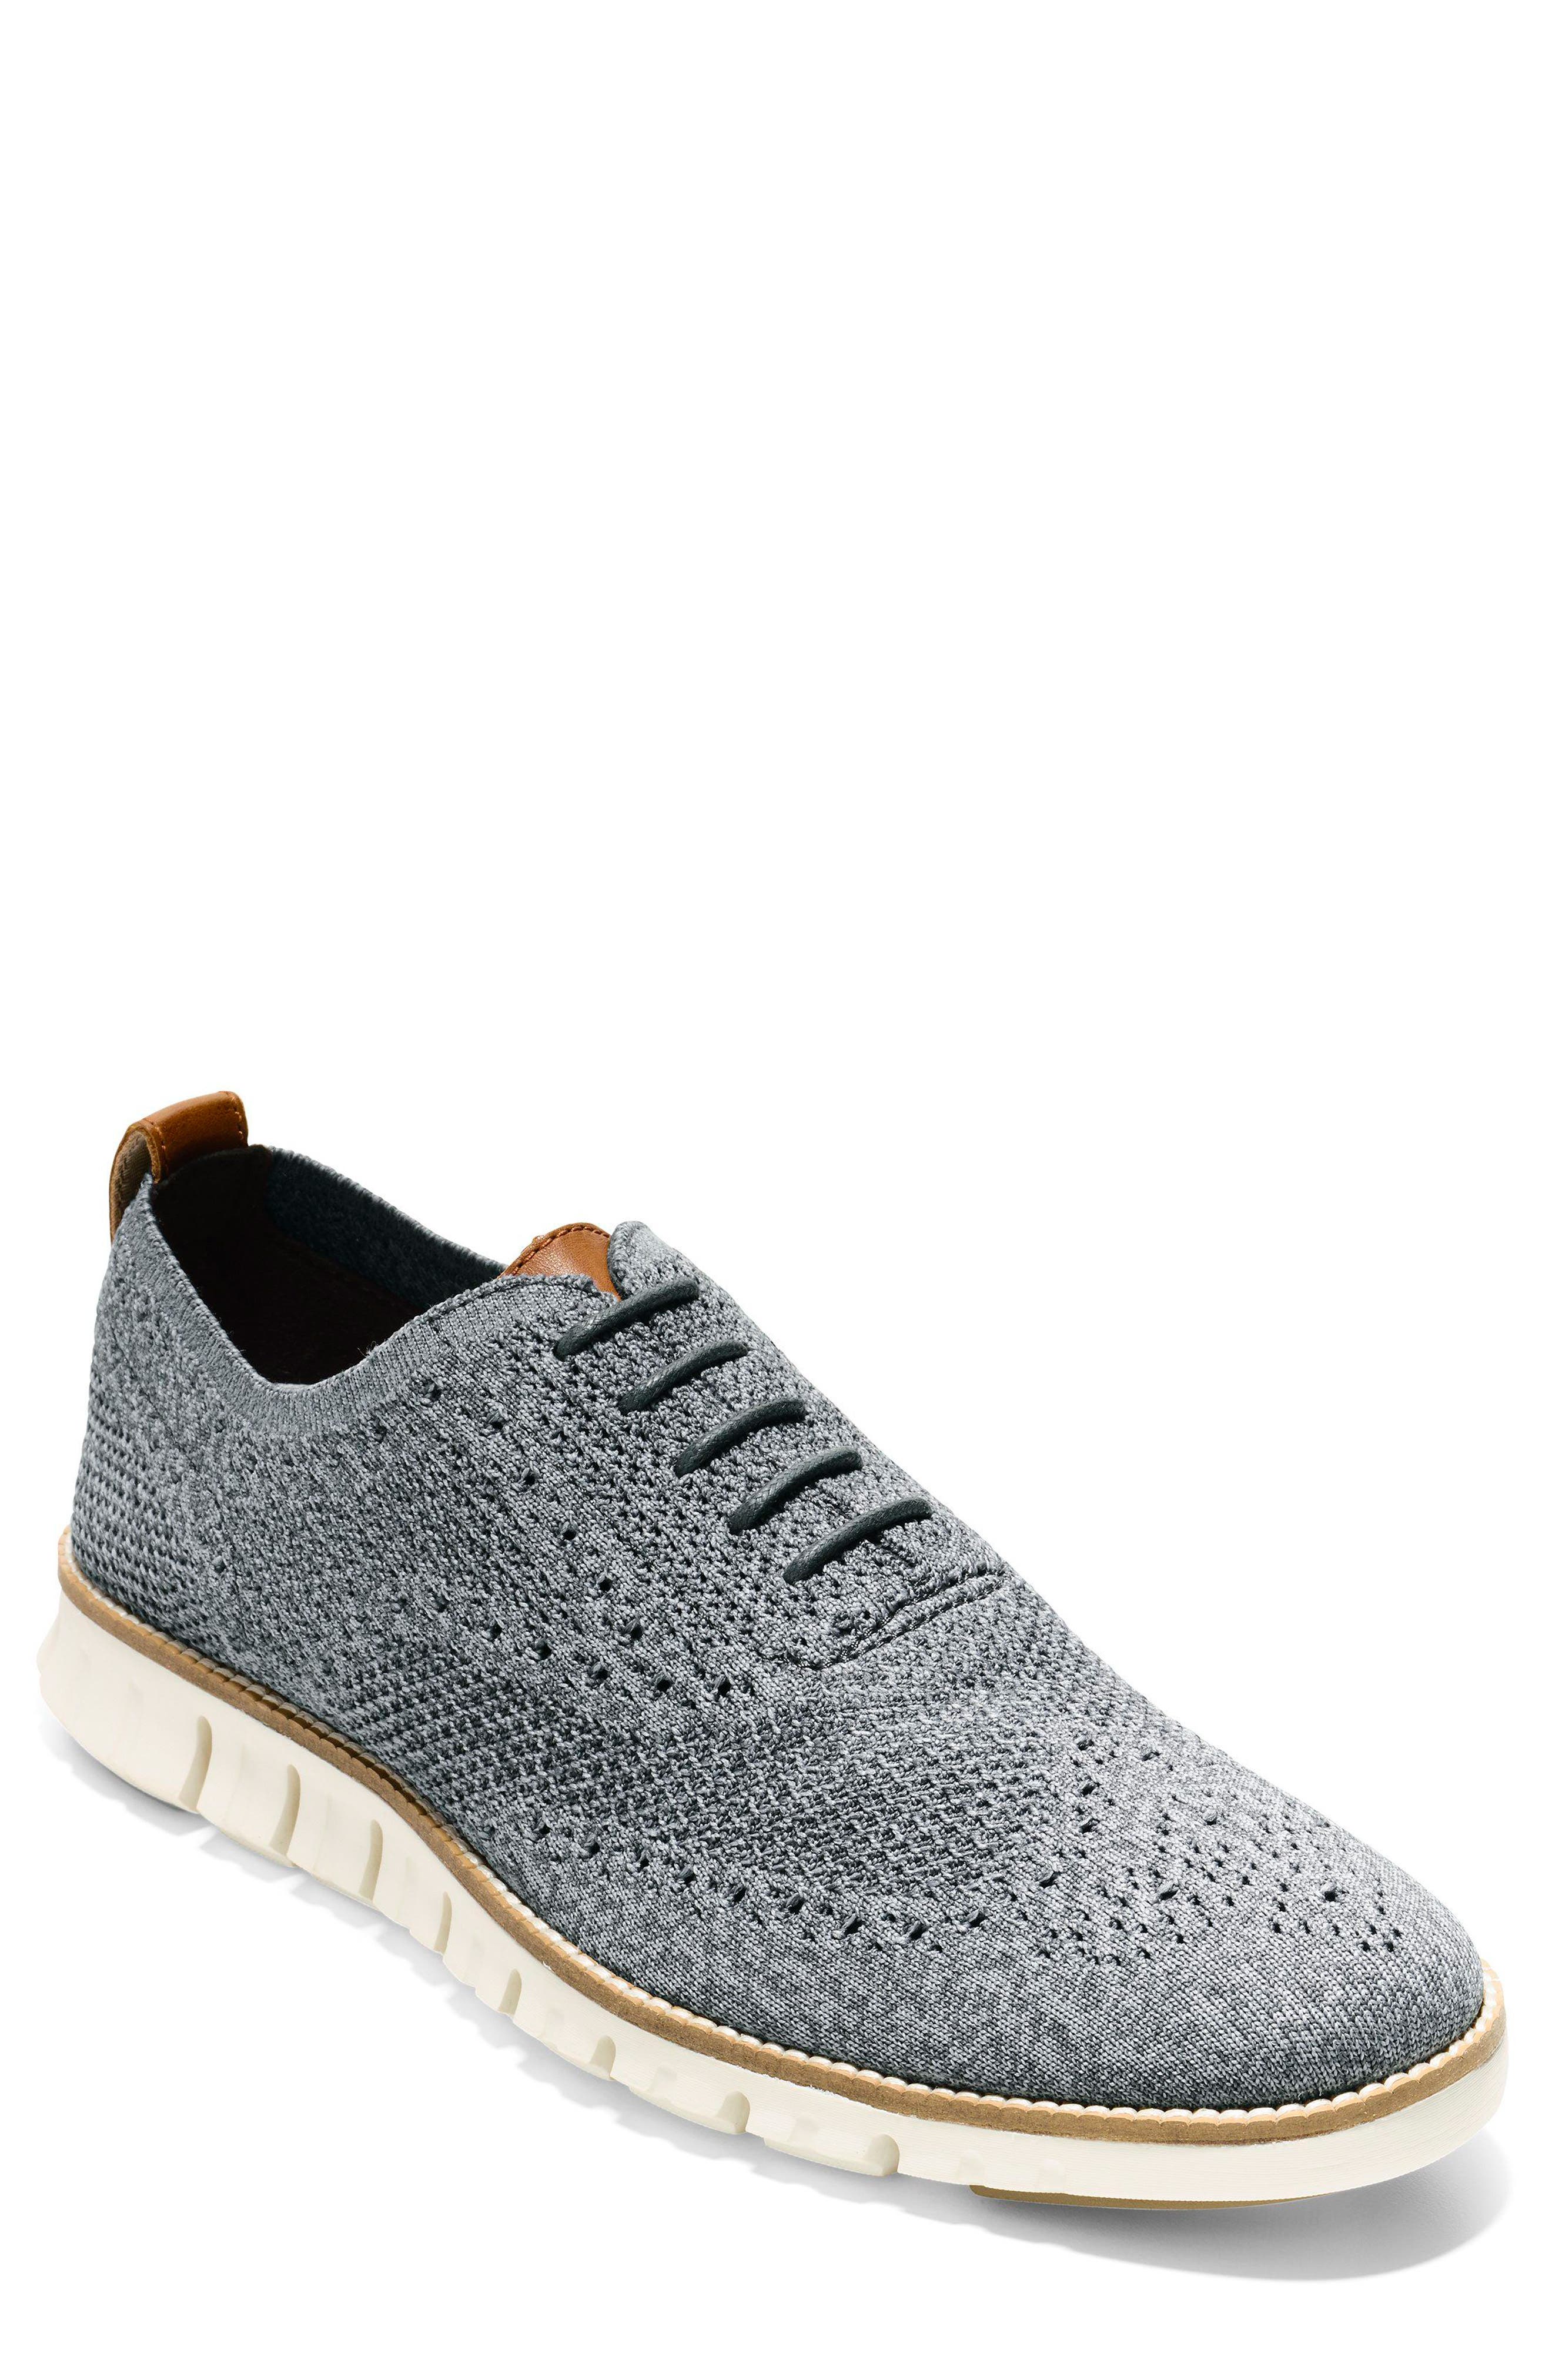 5.5 Glacier Gray/Ironstone Knit/Glacier Gray Leather/Optic White Cole Haan Womens Zerogrand All-Day Trainer with Stitchlite Sneaker 